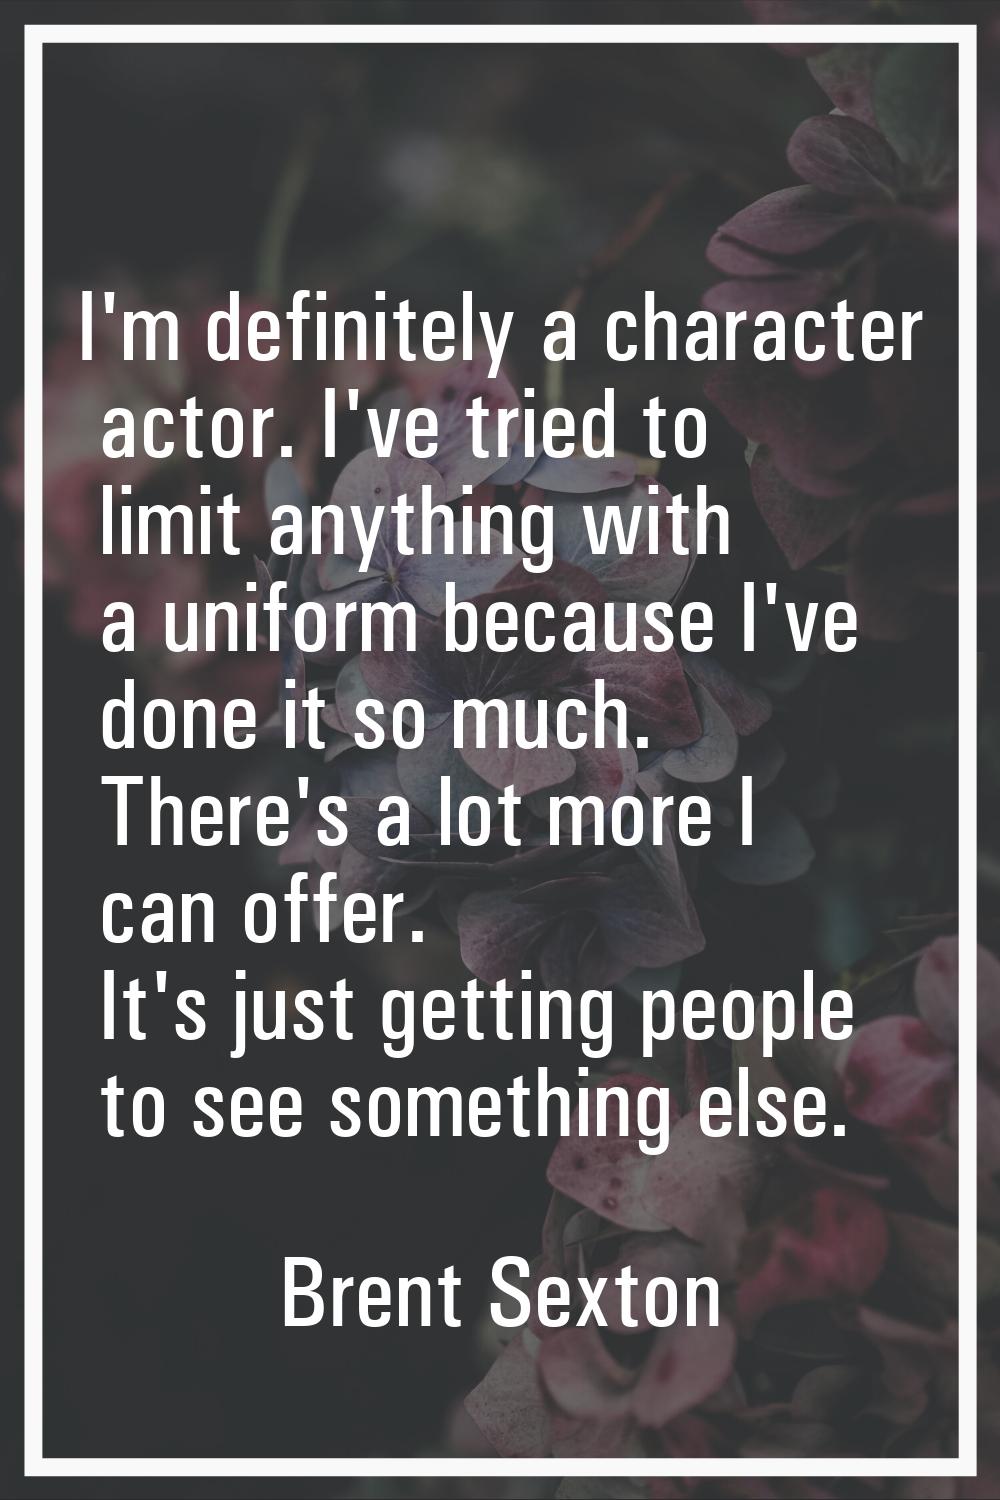 I'm definitely a character actor. I've tried to limit anything with a uniform because I've done it 